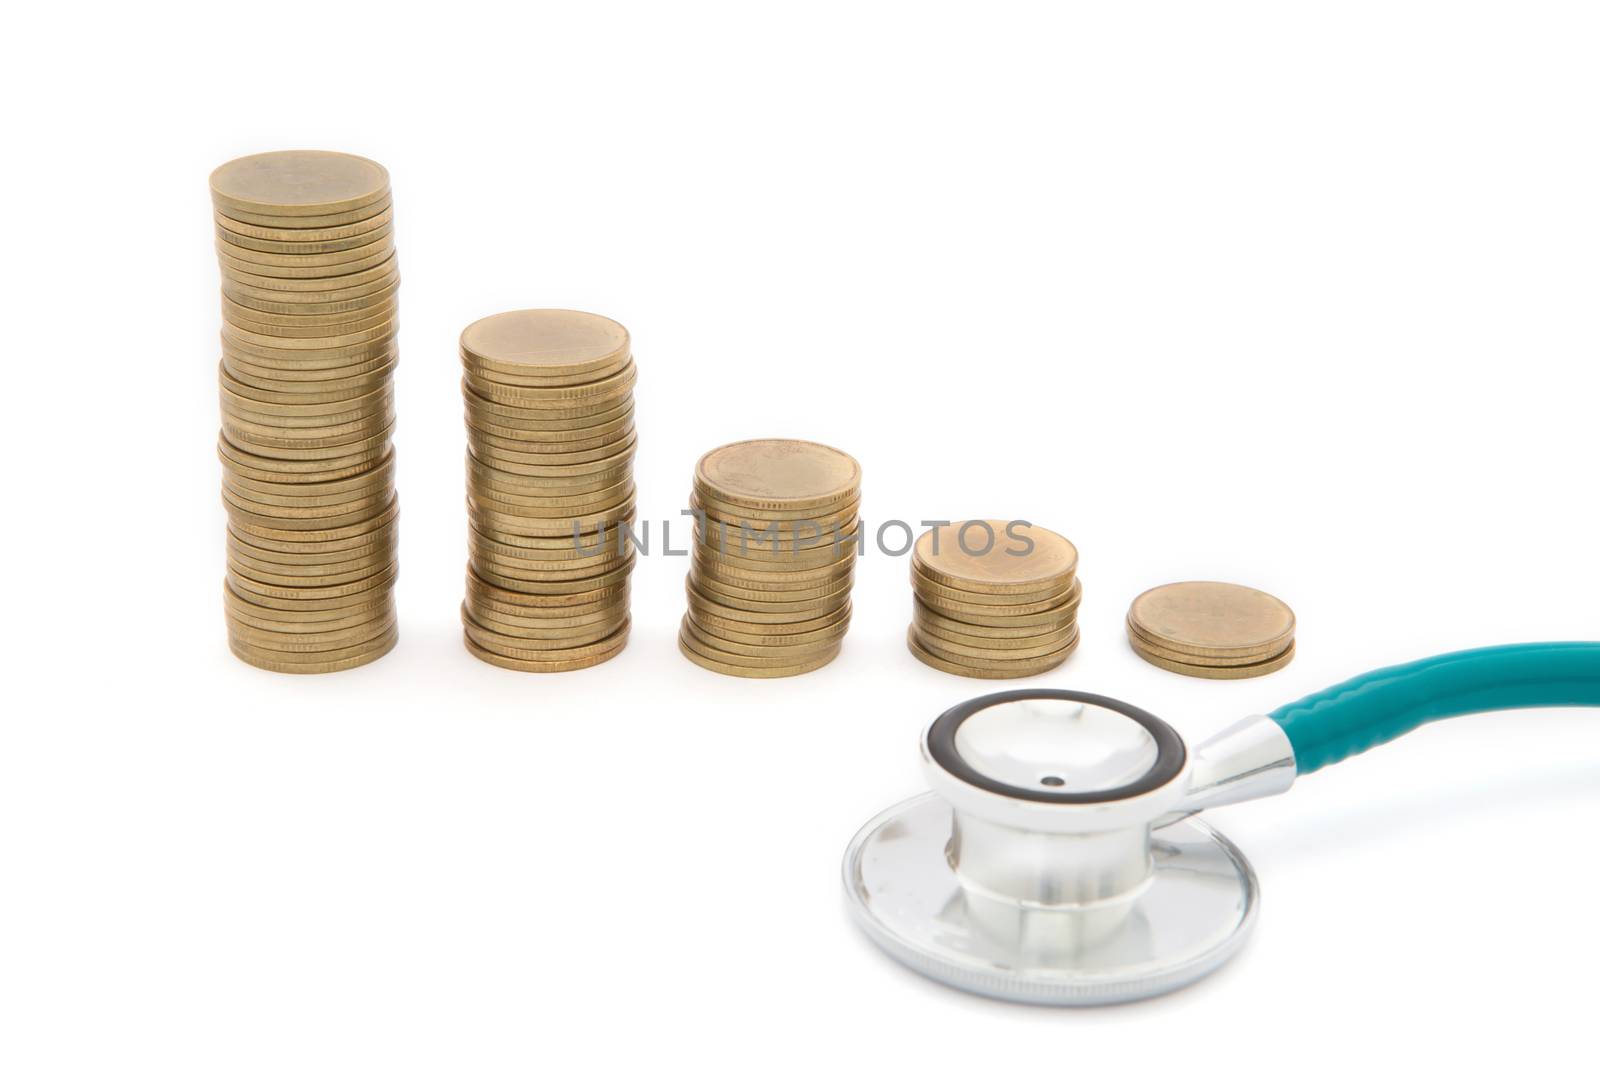 Stethoscope over  coins. Concept of saving bad economy